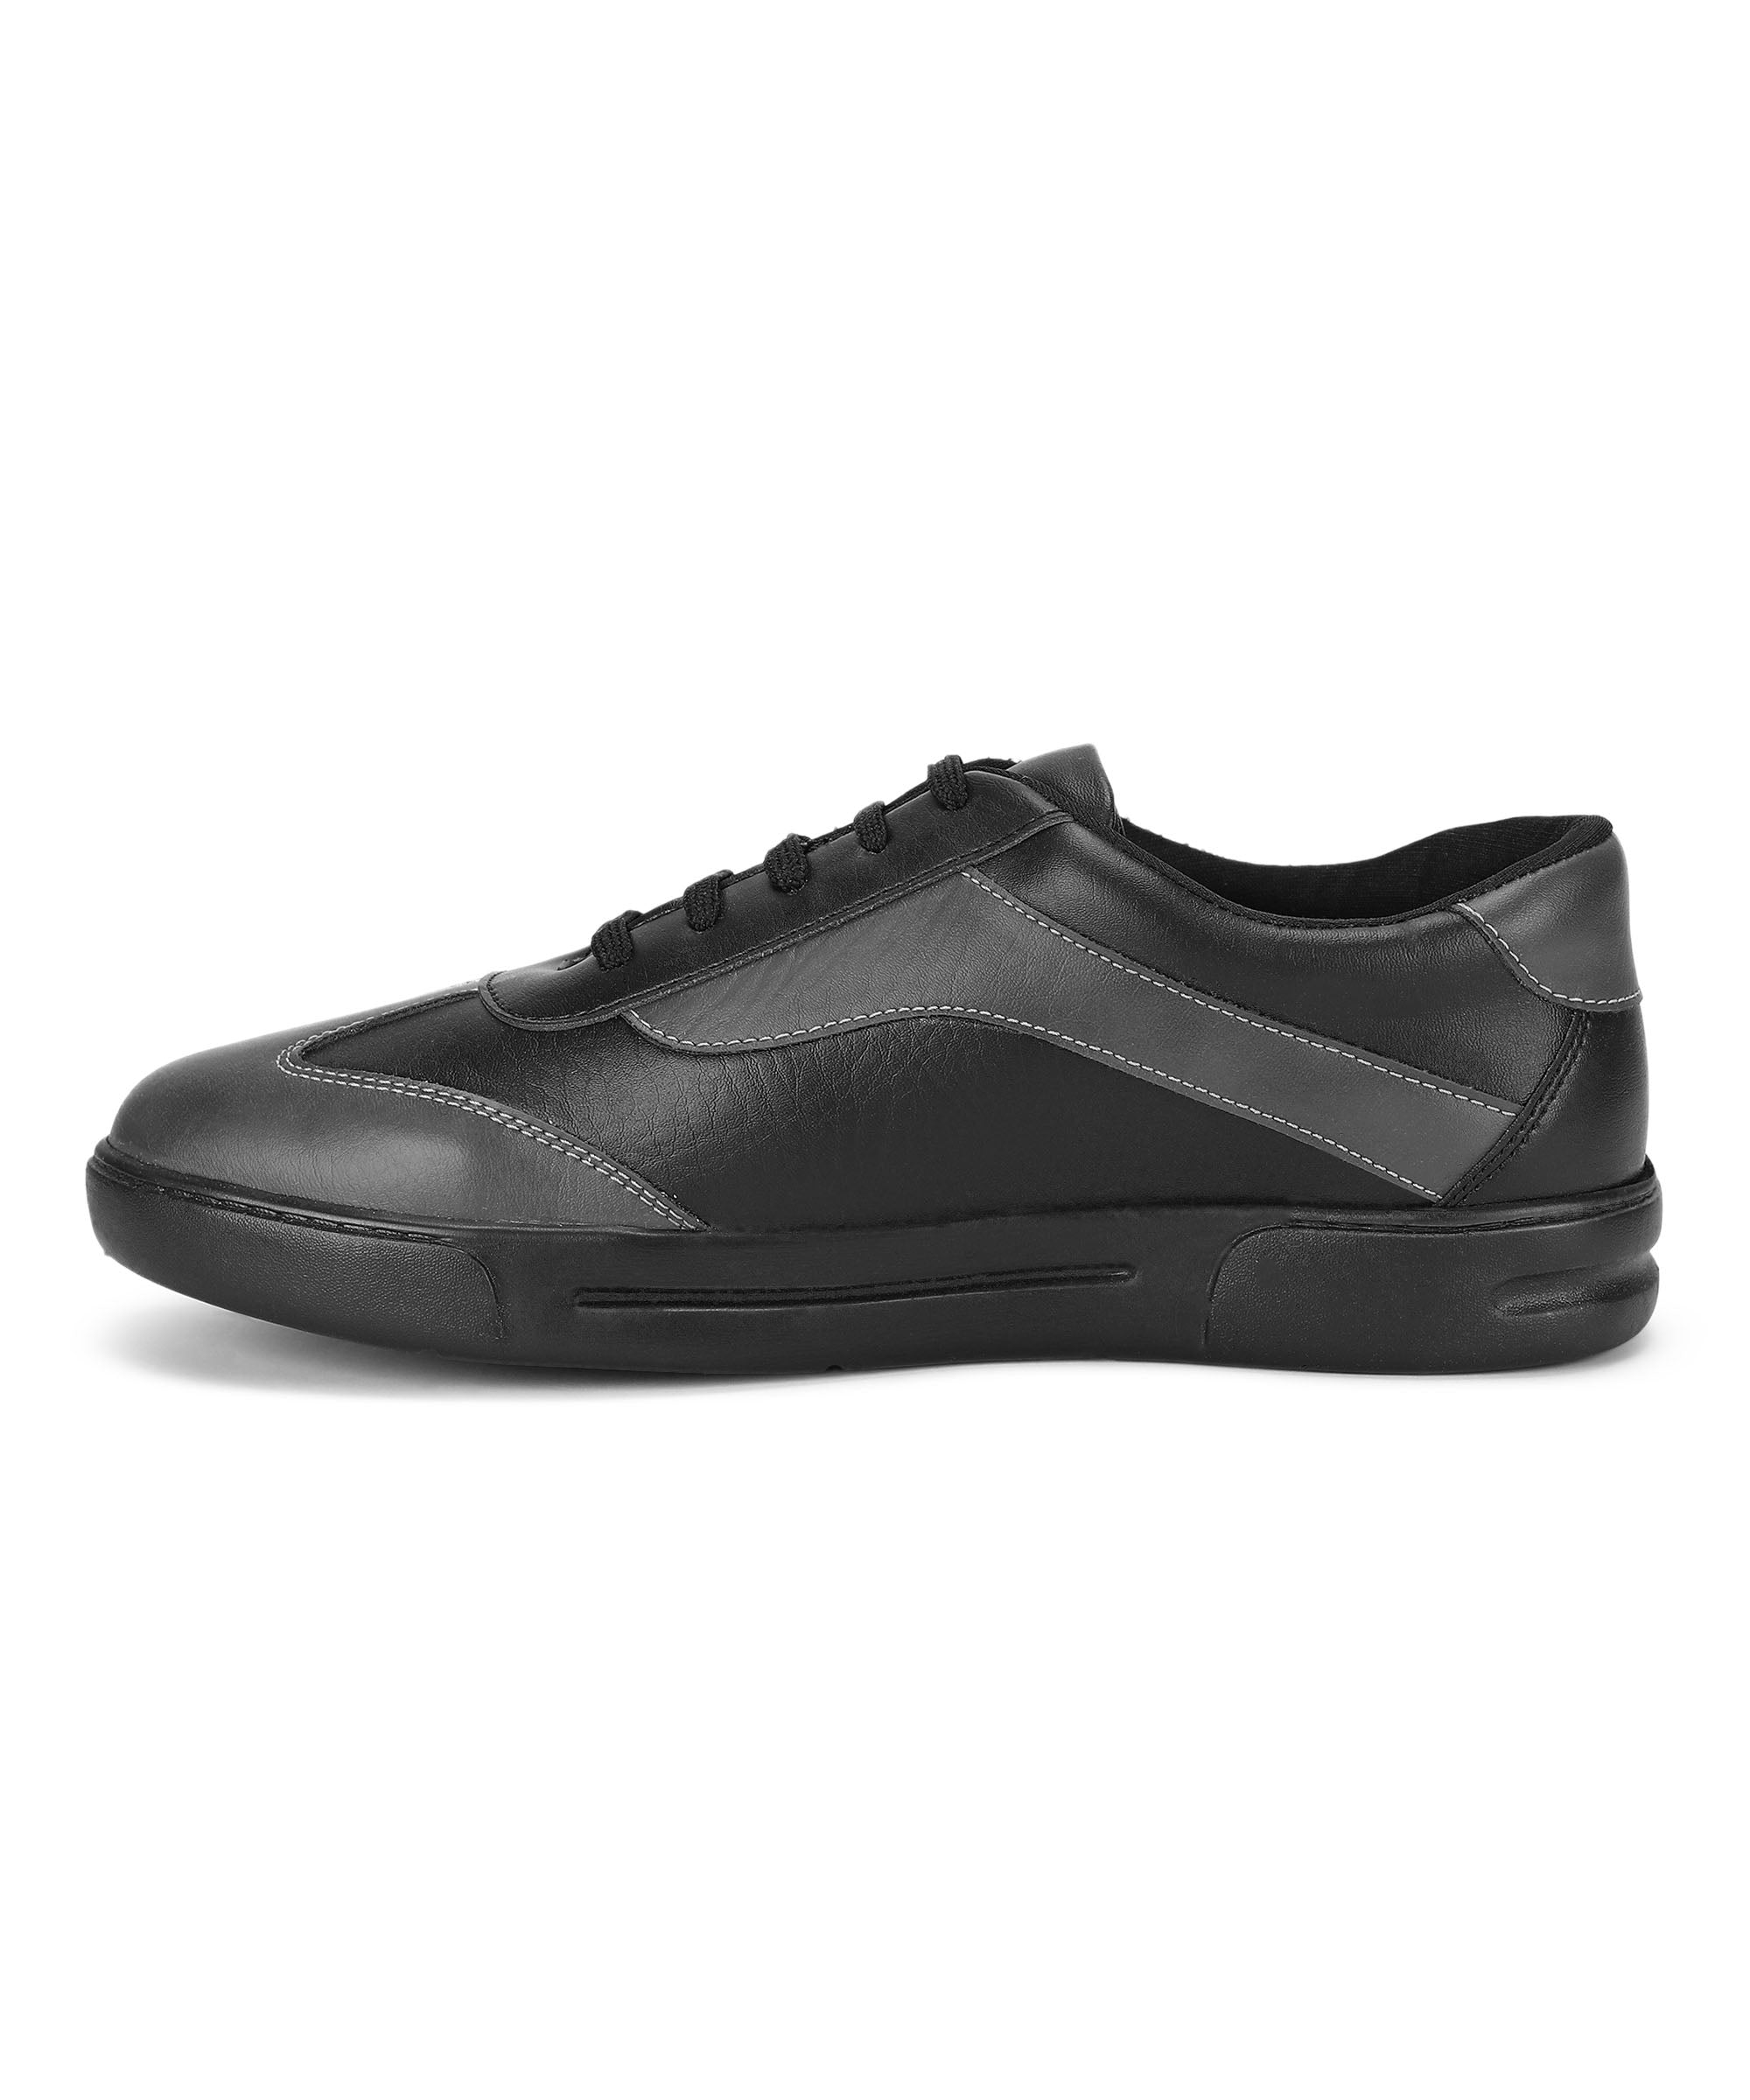 Paragon K1012G Men Casual Shoes | Stylish Walking Outdoor Shoes for Everyday Wear | Smart &amp; Trendy Design  | Comfortable Cushioned Soles Black-Dark Grey